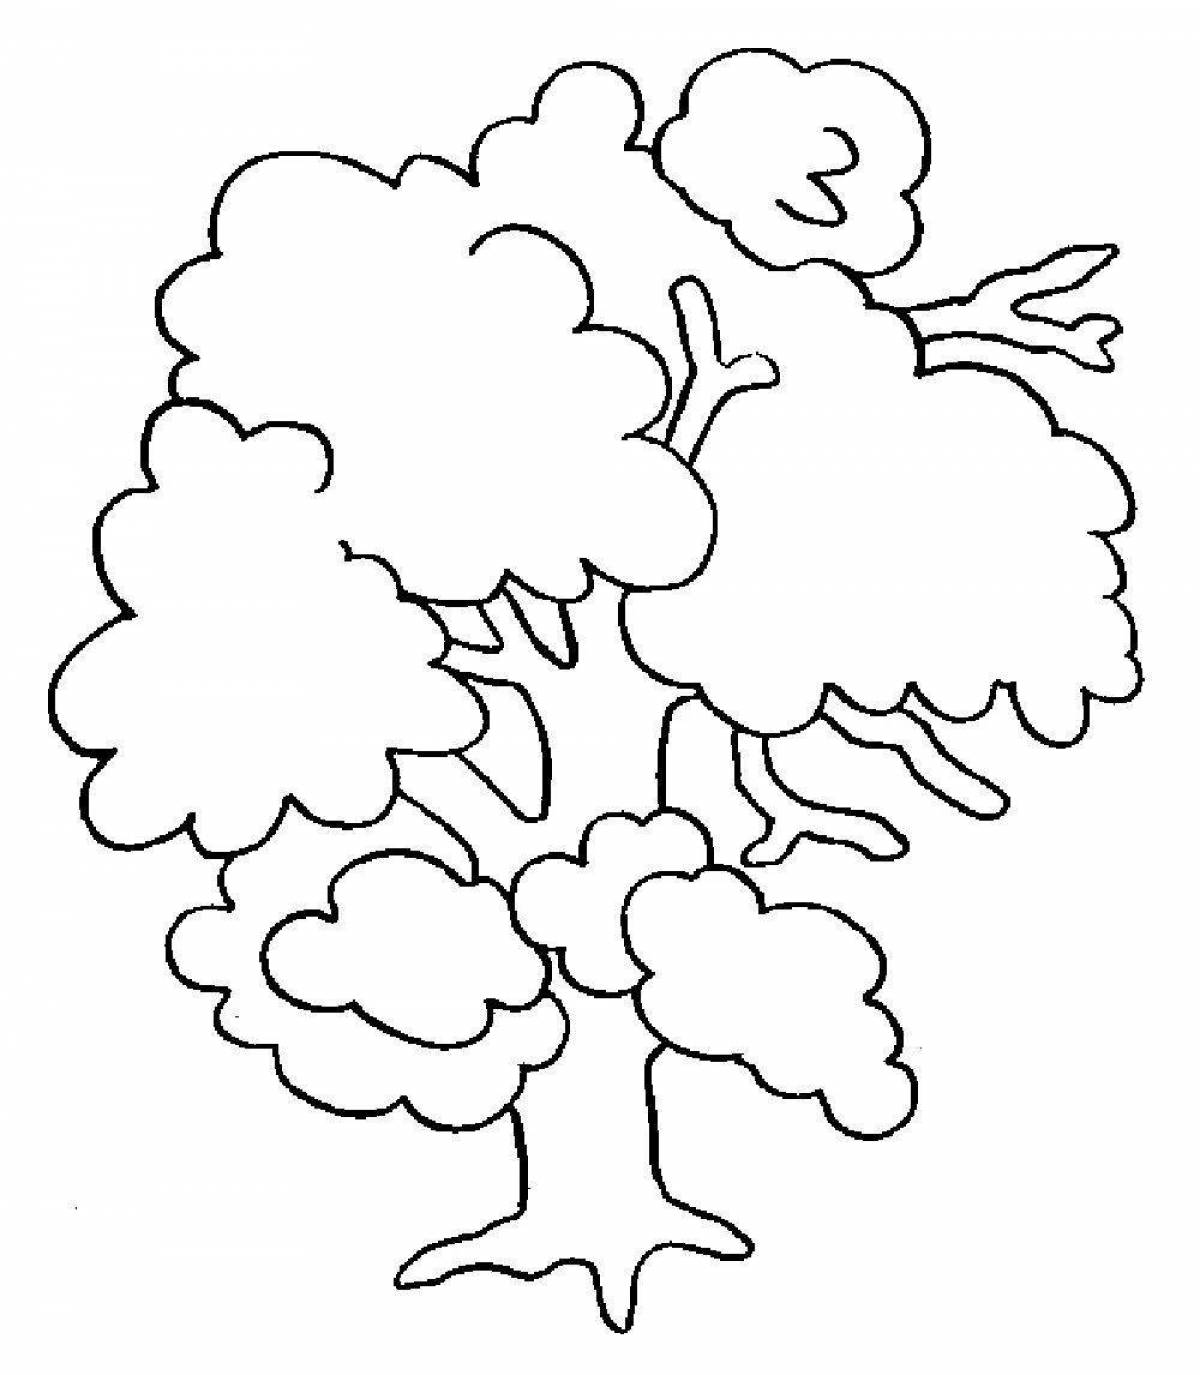 Amazing bush coloring page for kids